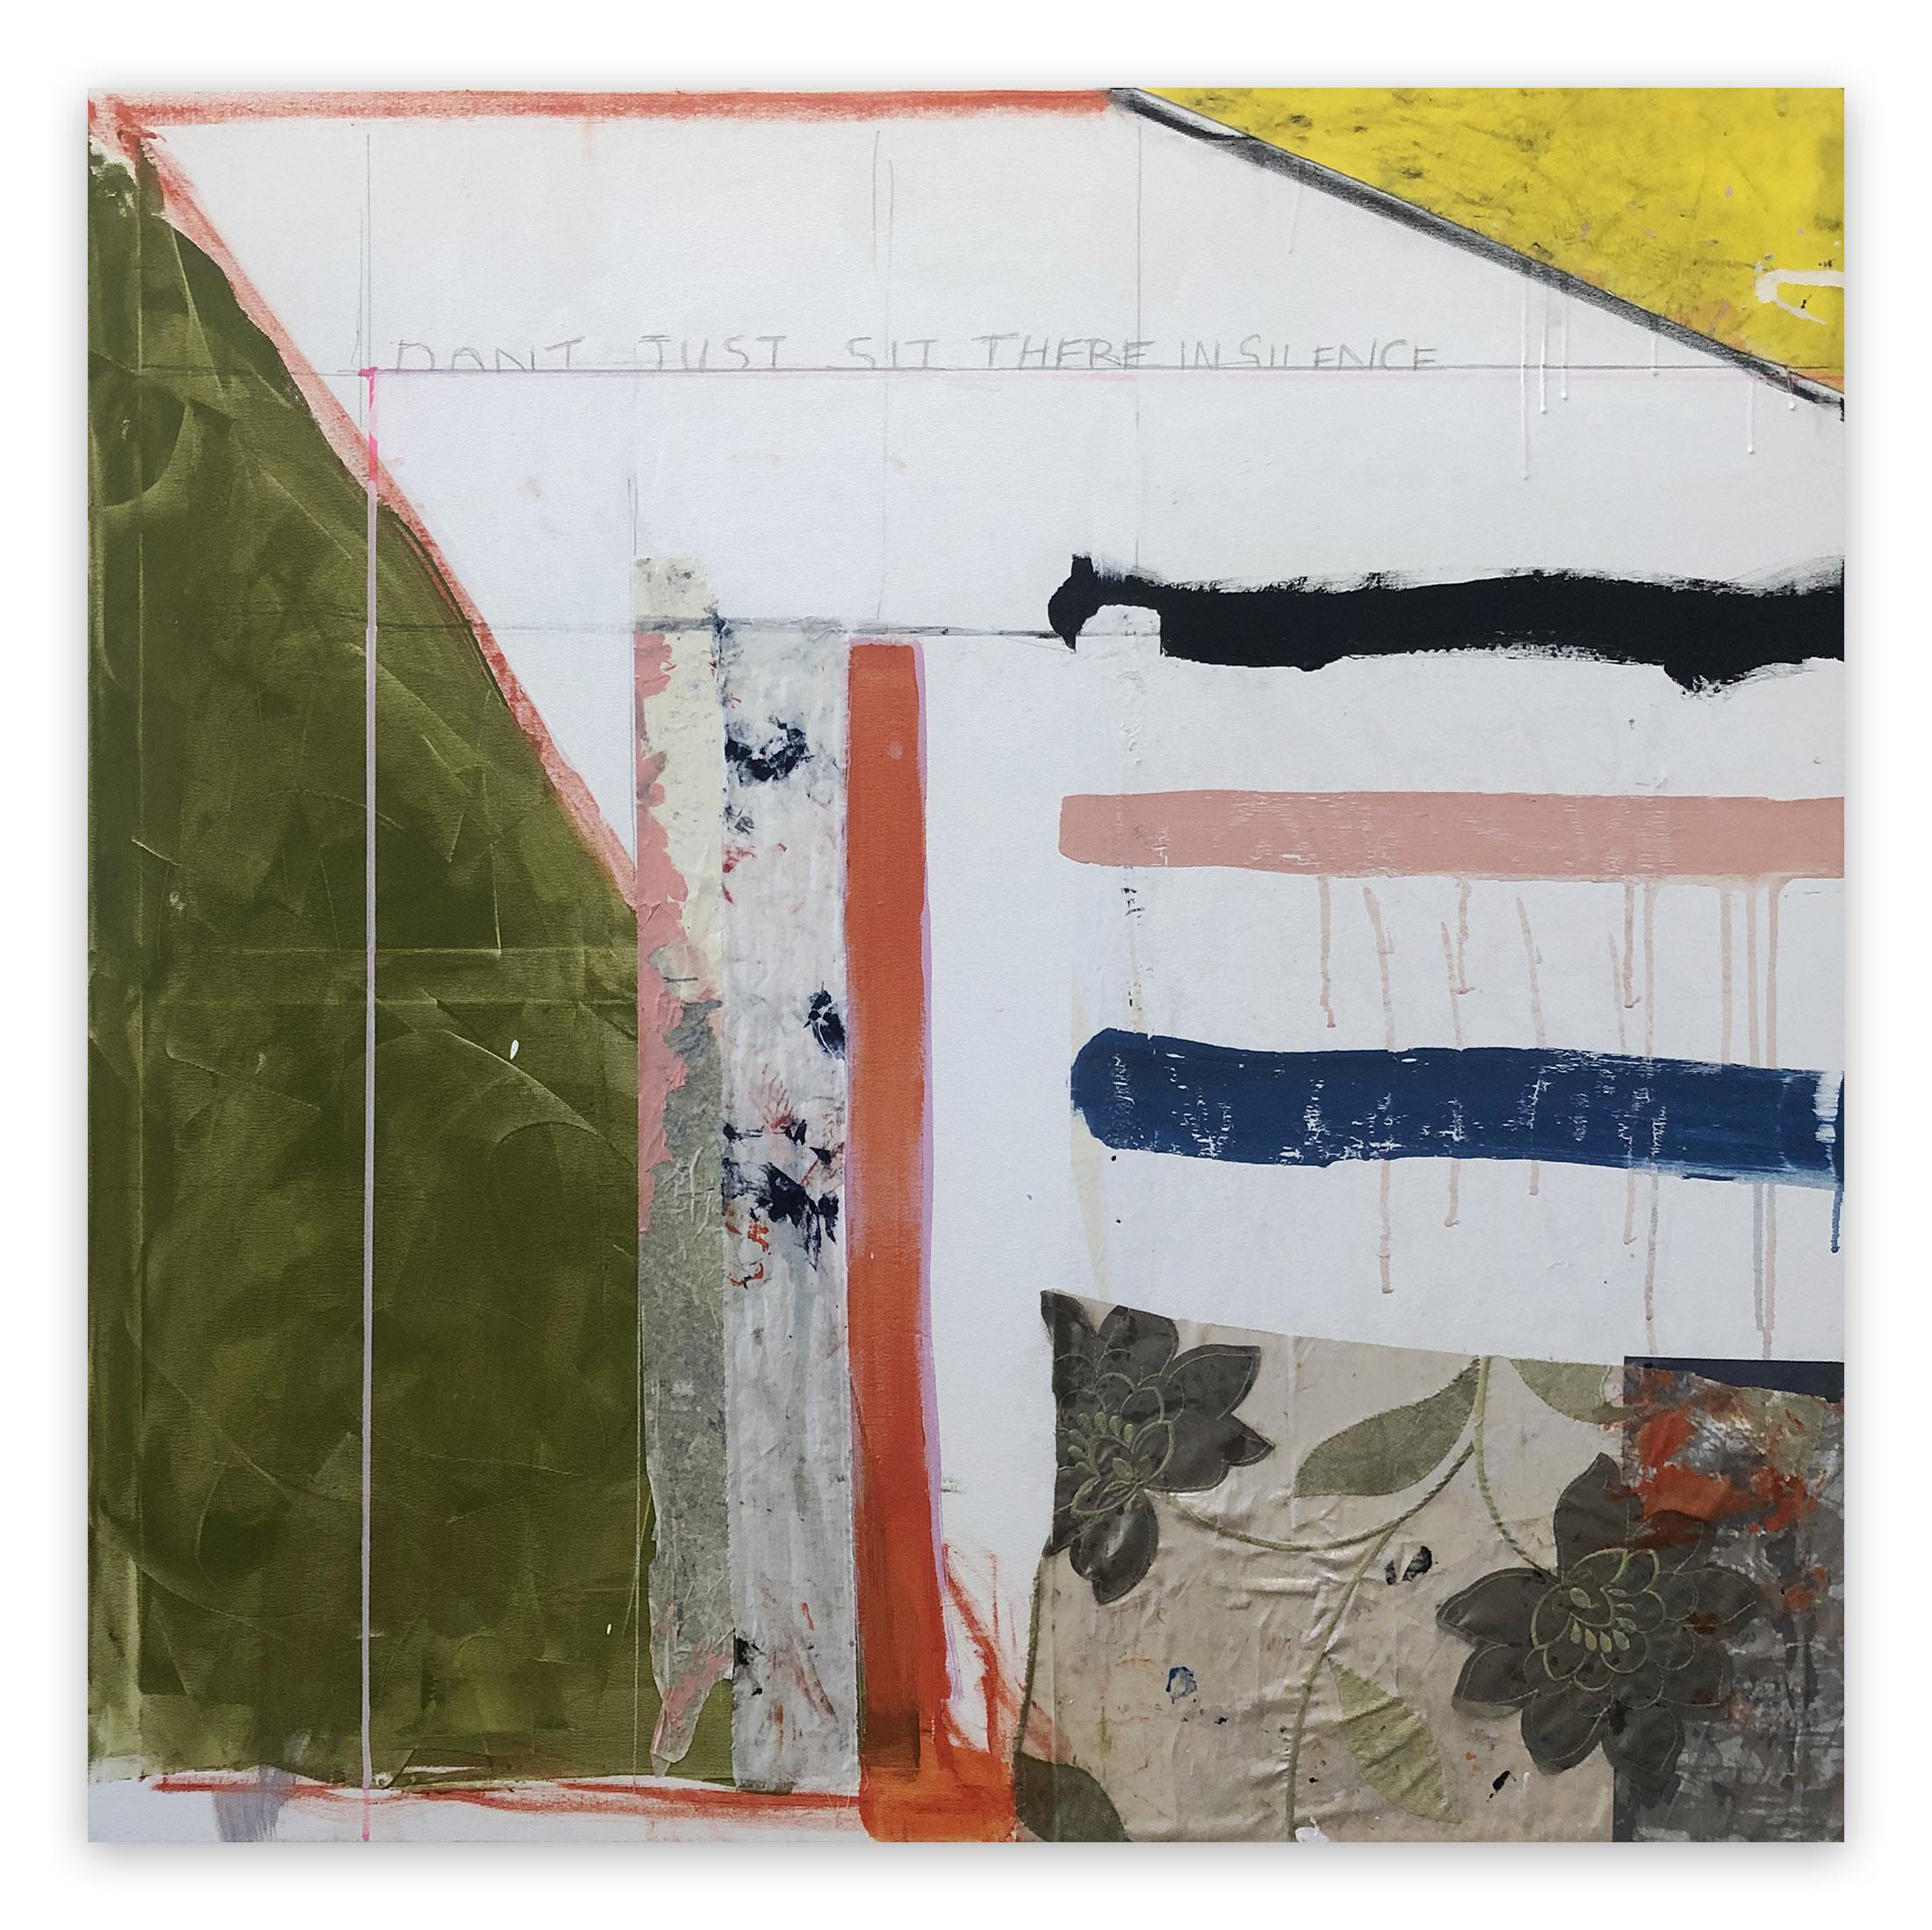 Don't Just Sit There in Silence (Abstract Painting)

Fabric tape and paper on canvas - Unframed.

This artwork is exclusive to IdeelArt.

Tim Fawcett’s paintings point towards the legacy of Art Brut, establishing a midpoint between abstraction and